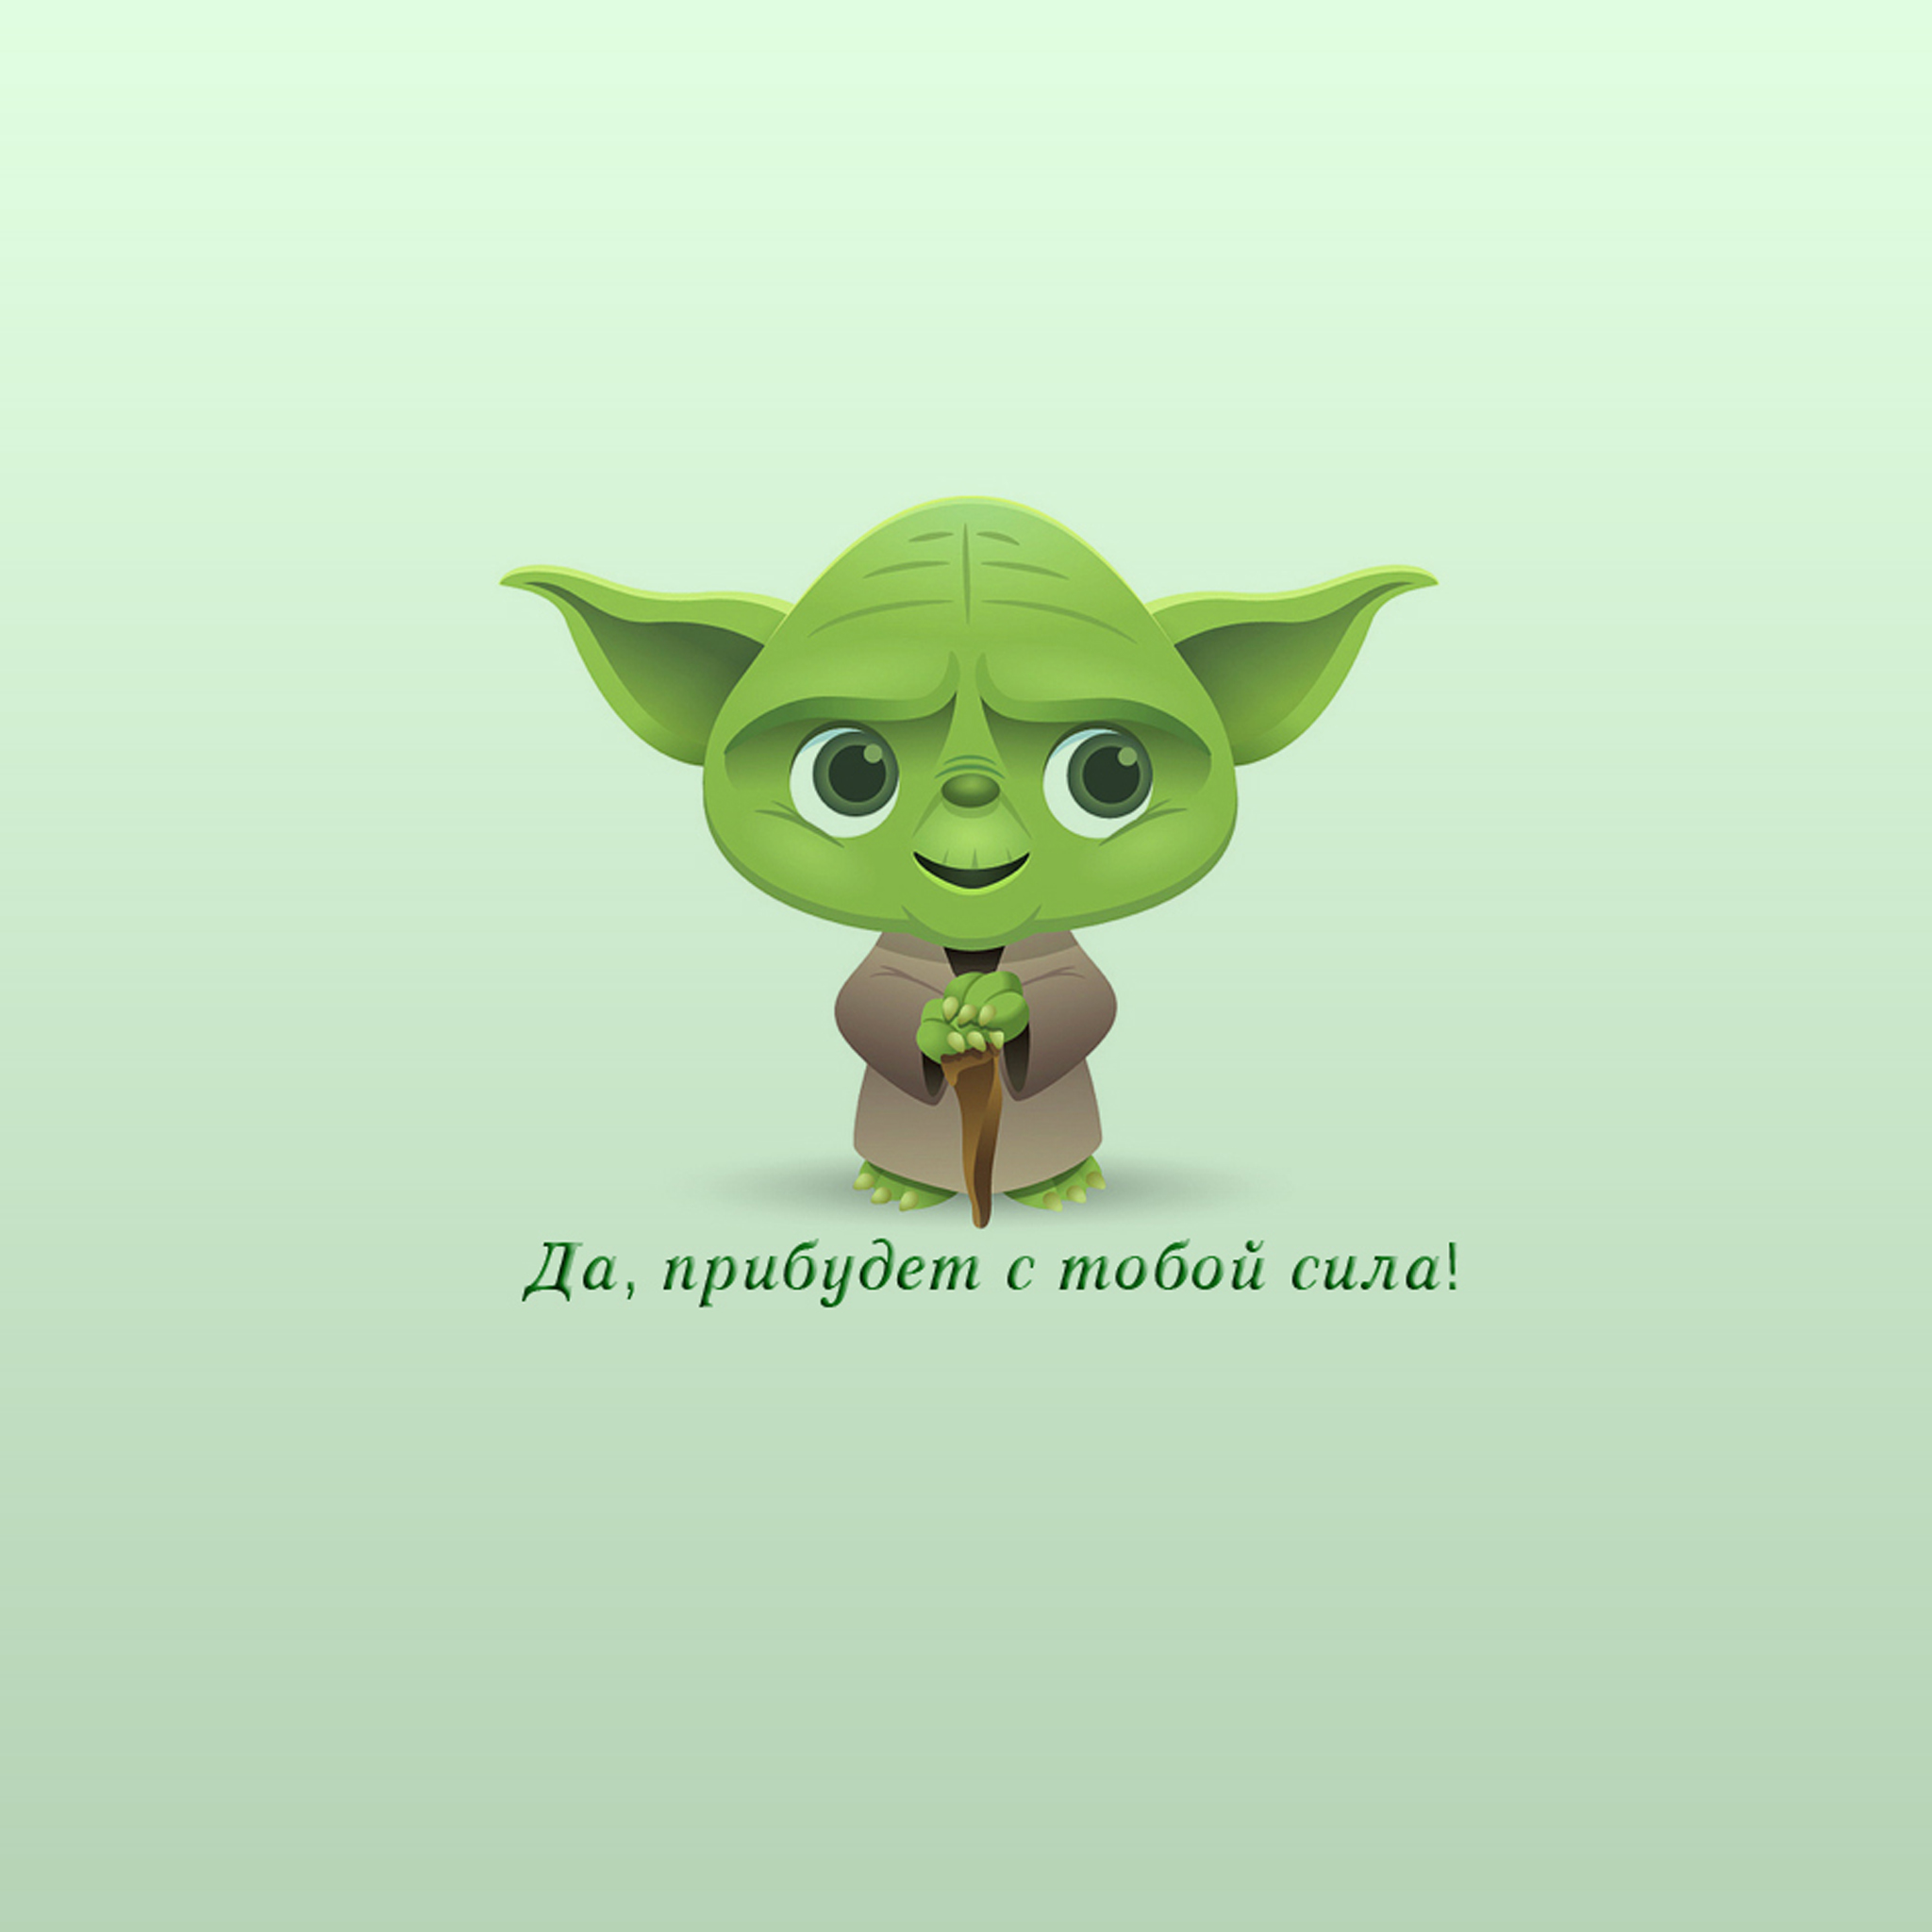 Yoda IPhone Wallpaper Images Crazy Gallery